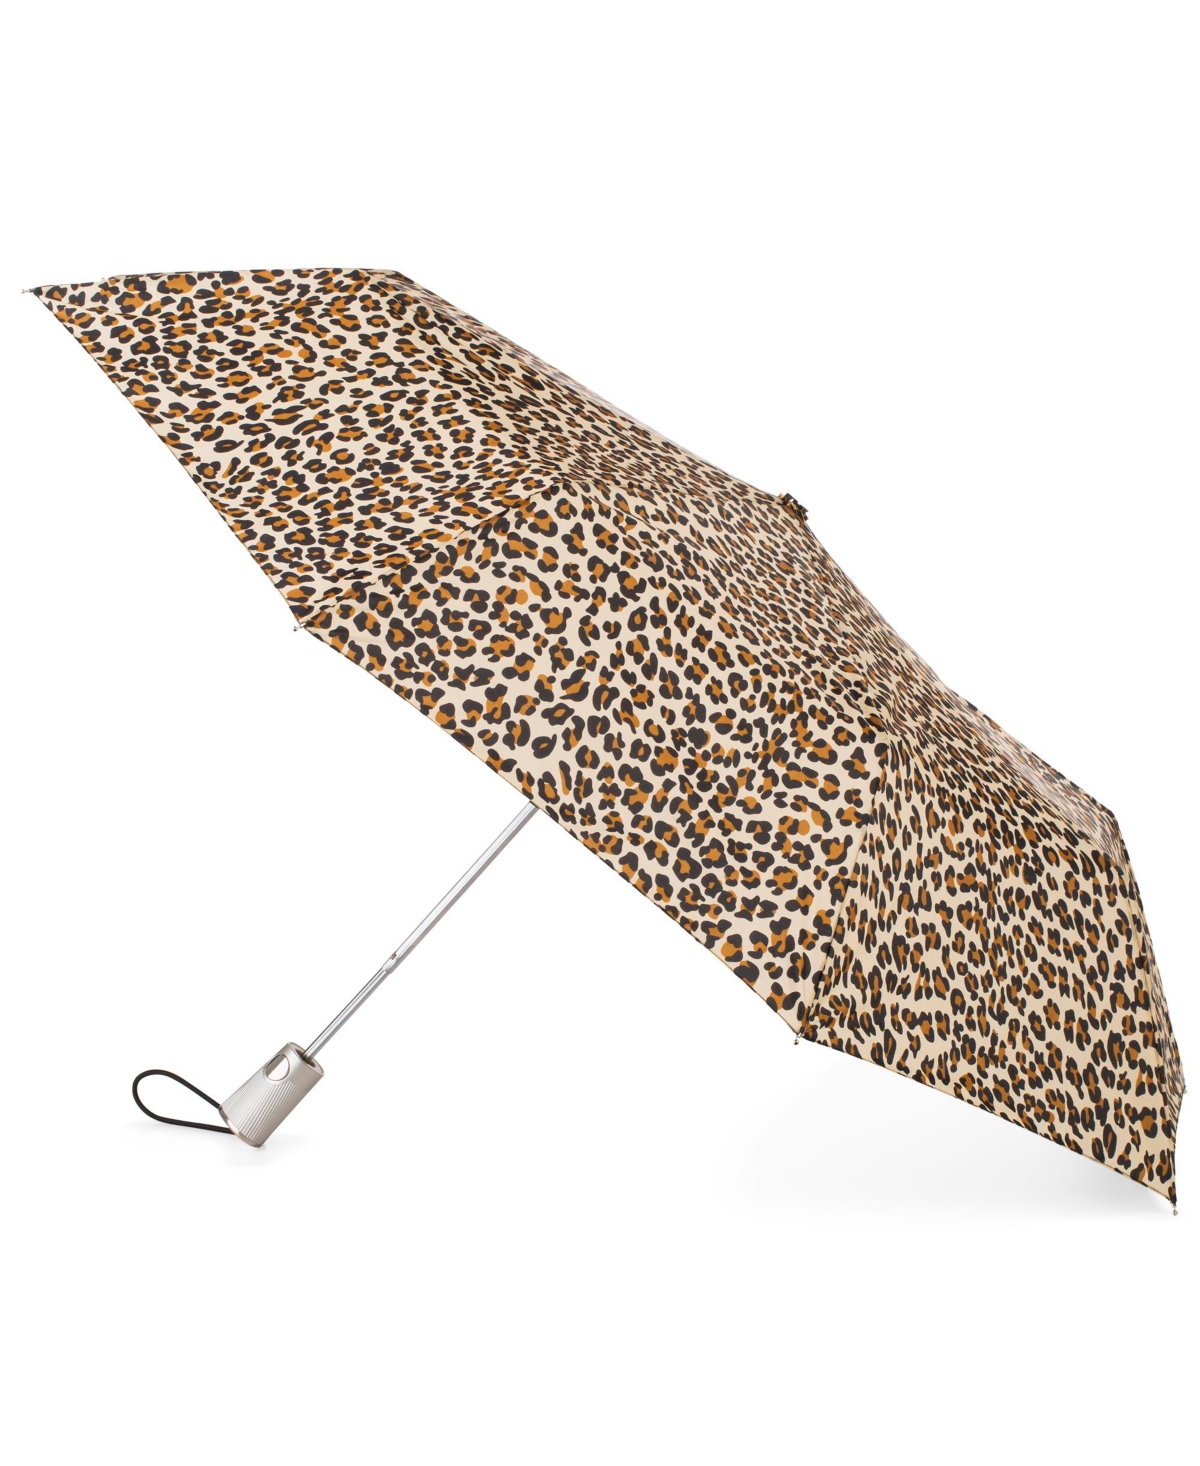 Auto Open Umbrella with Water Repellent Technology - Leopard Sp